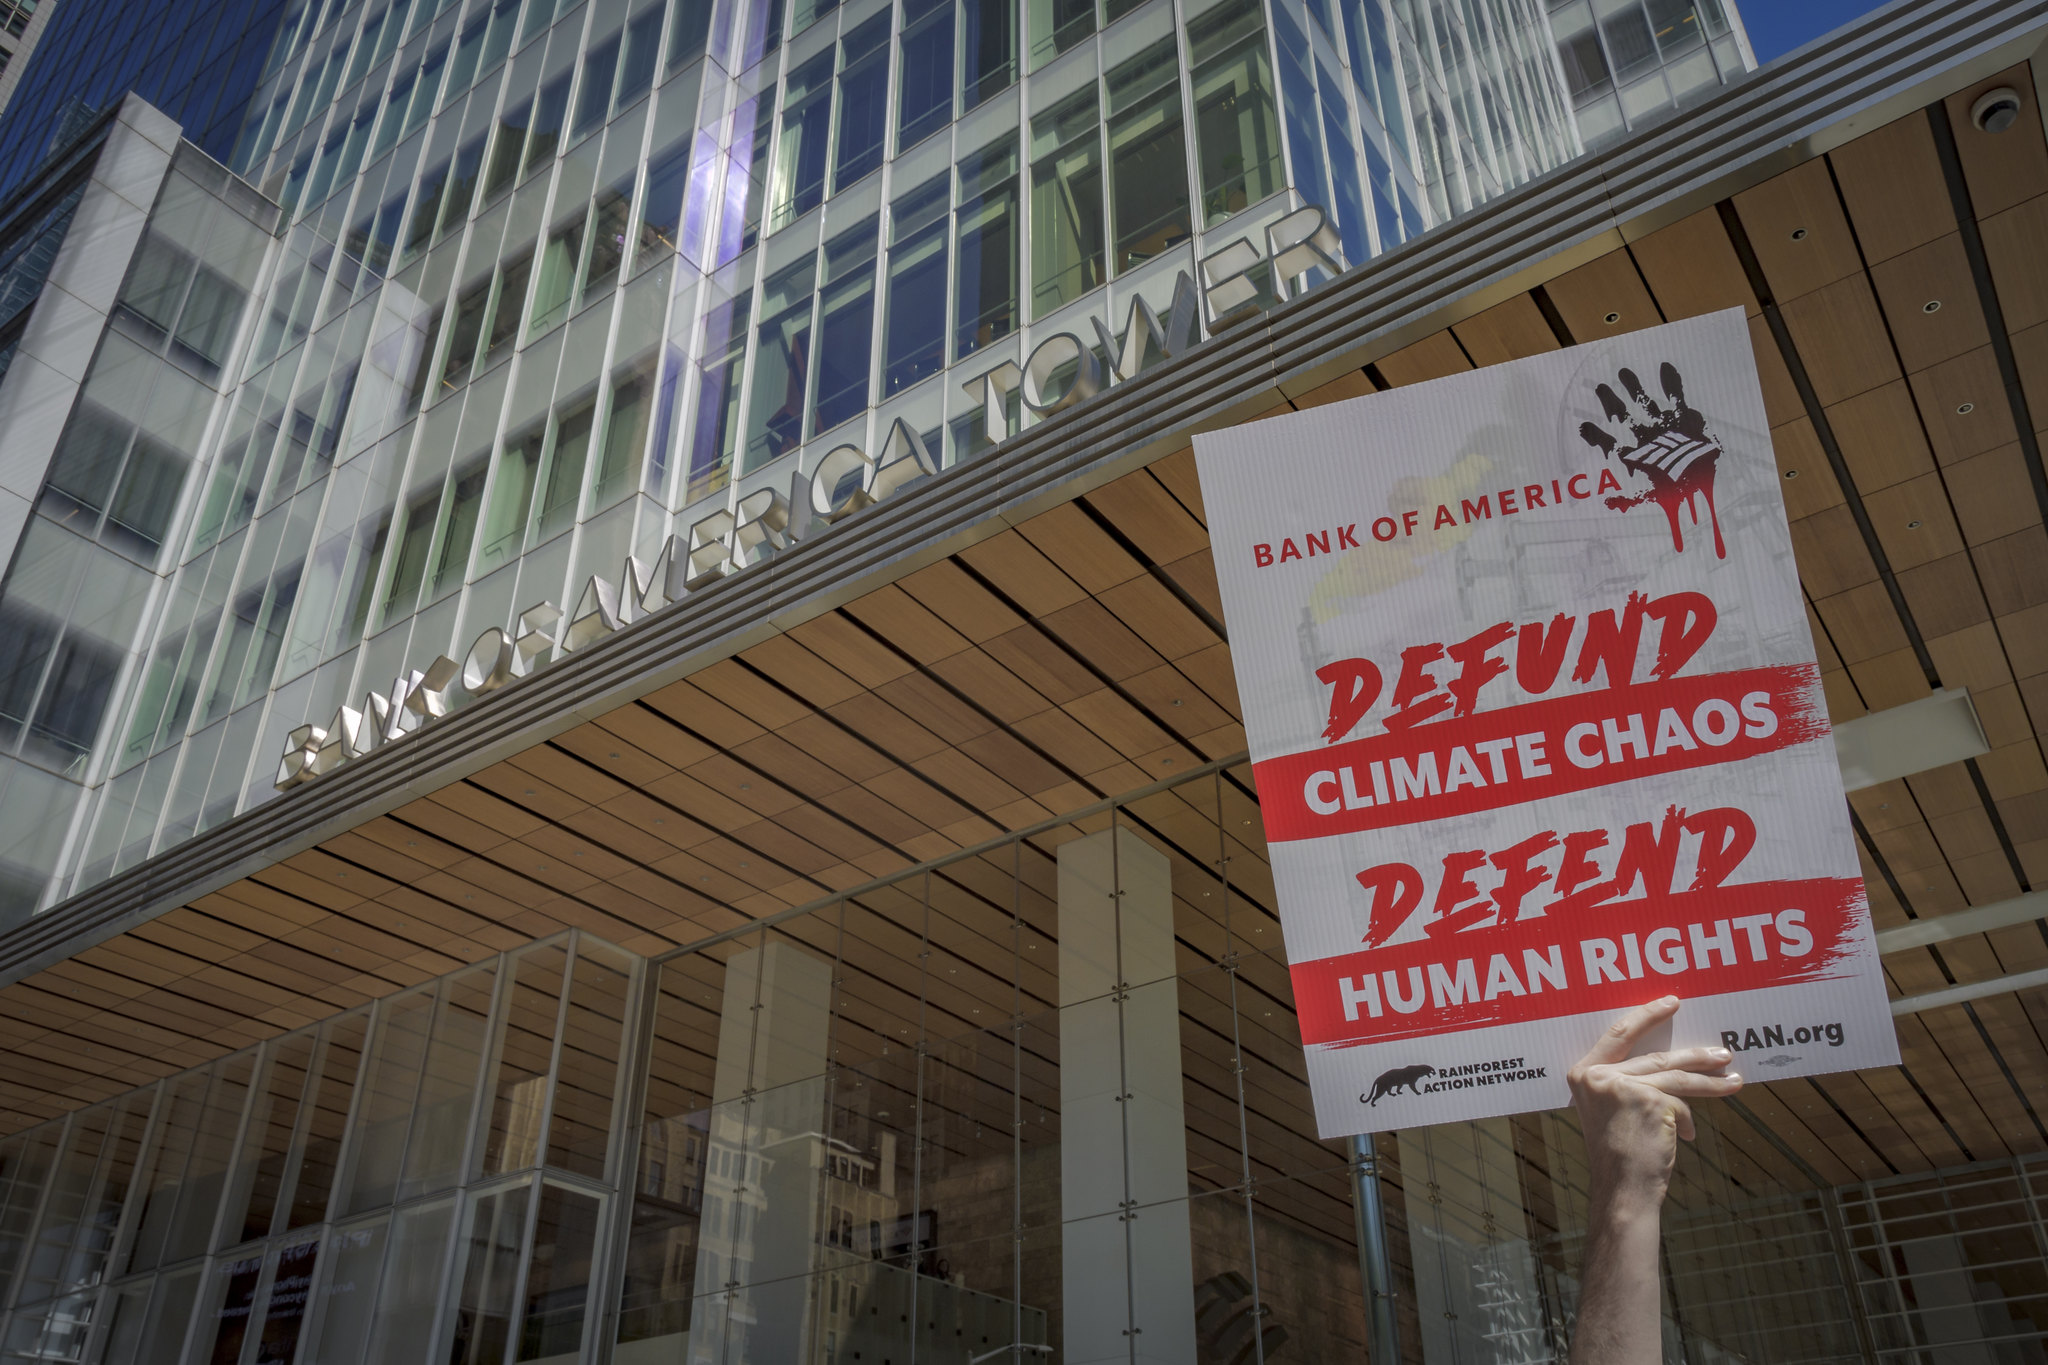 a protest sign held in front of camera that read defund climate chaos defend human rights